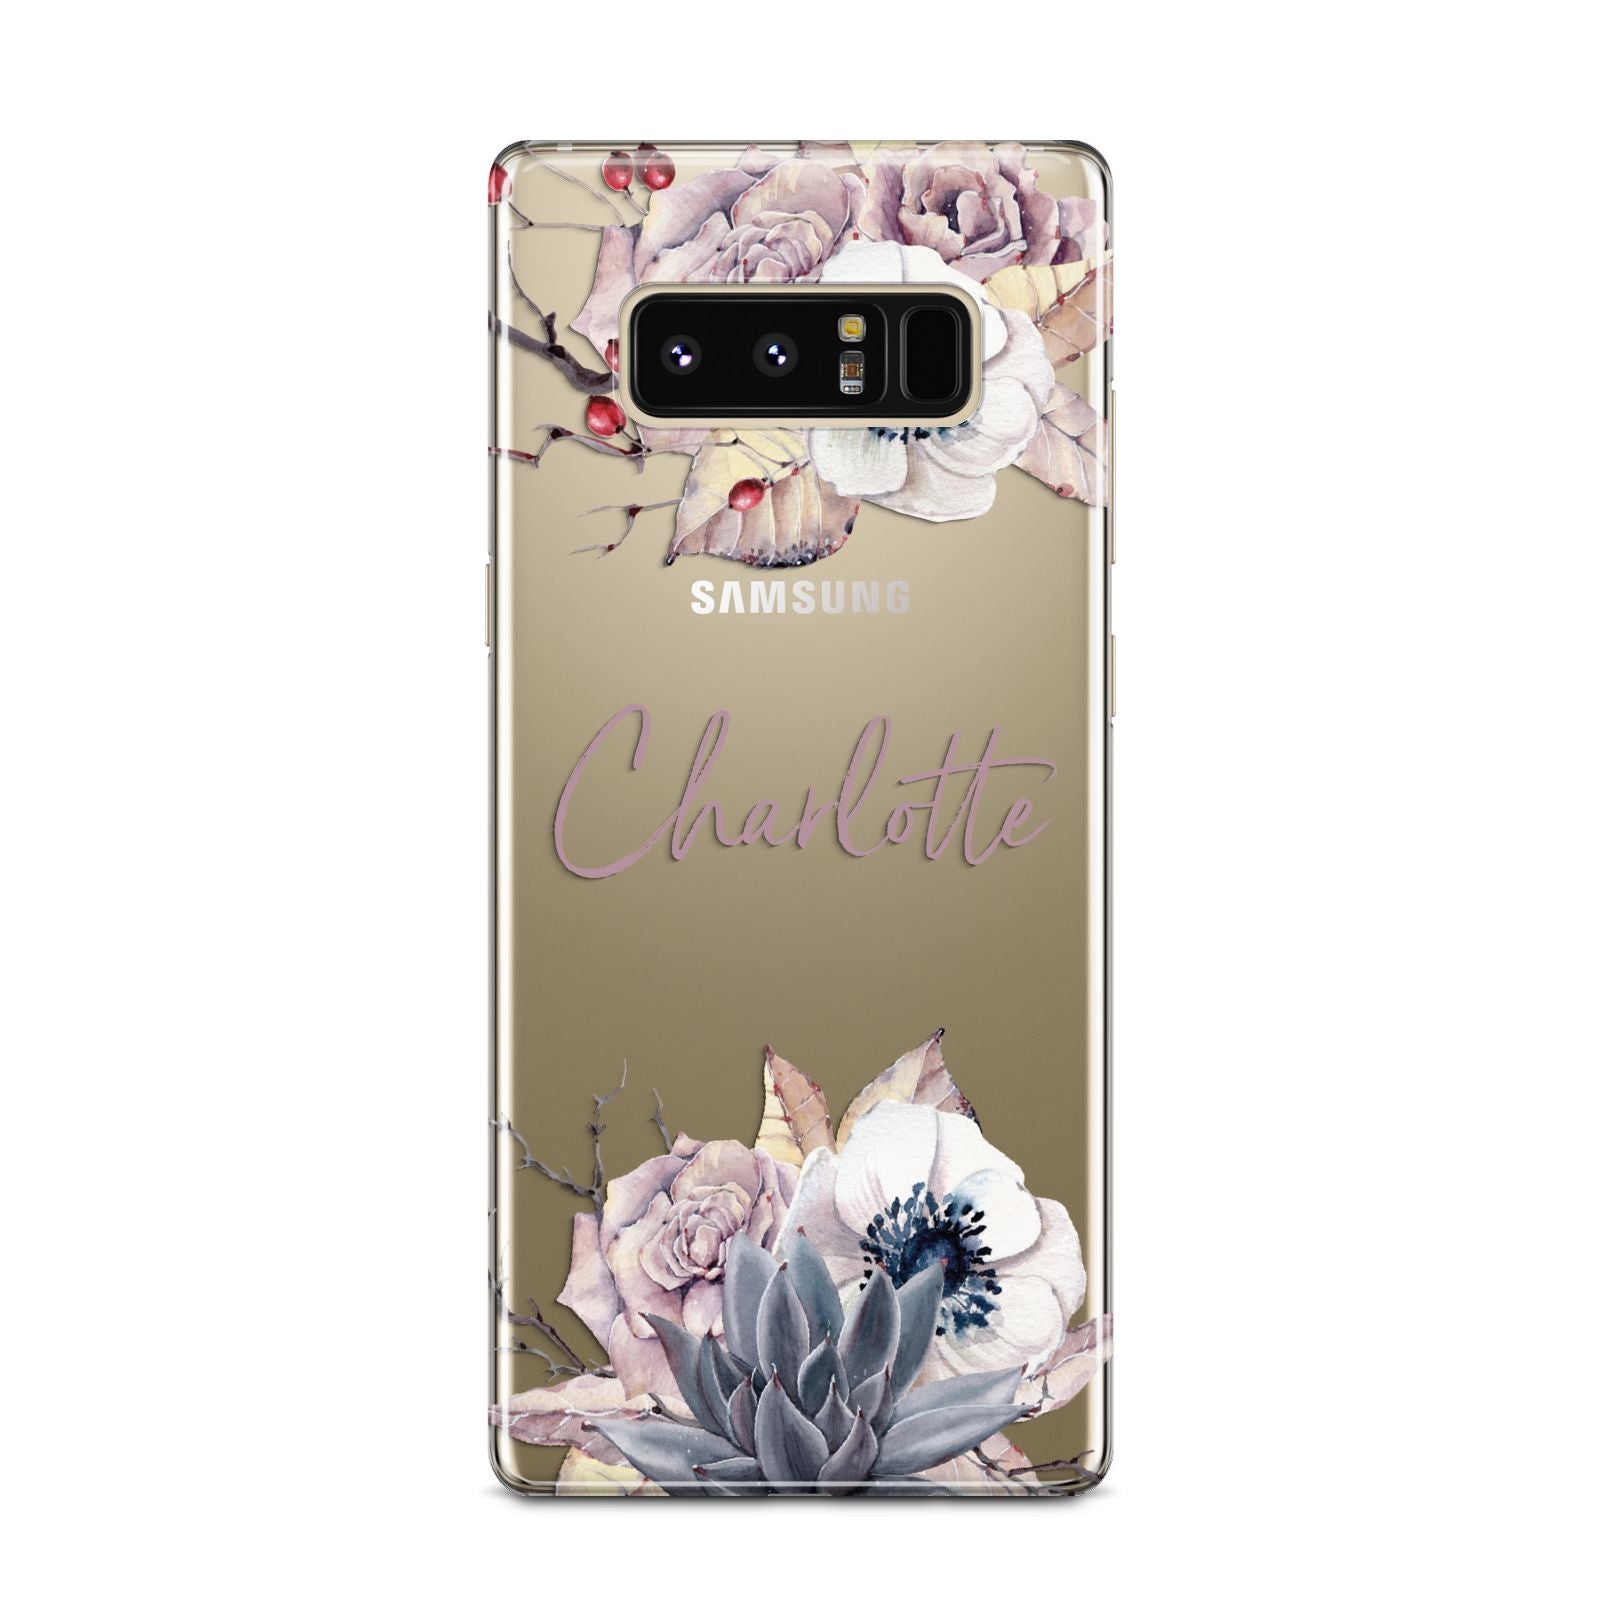 Personalised Autumn Floral Samsung Galaxy Note 8 Case